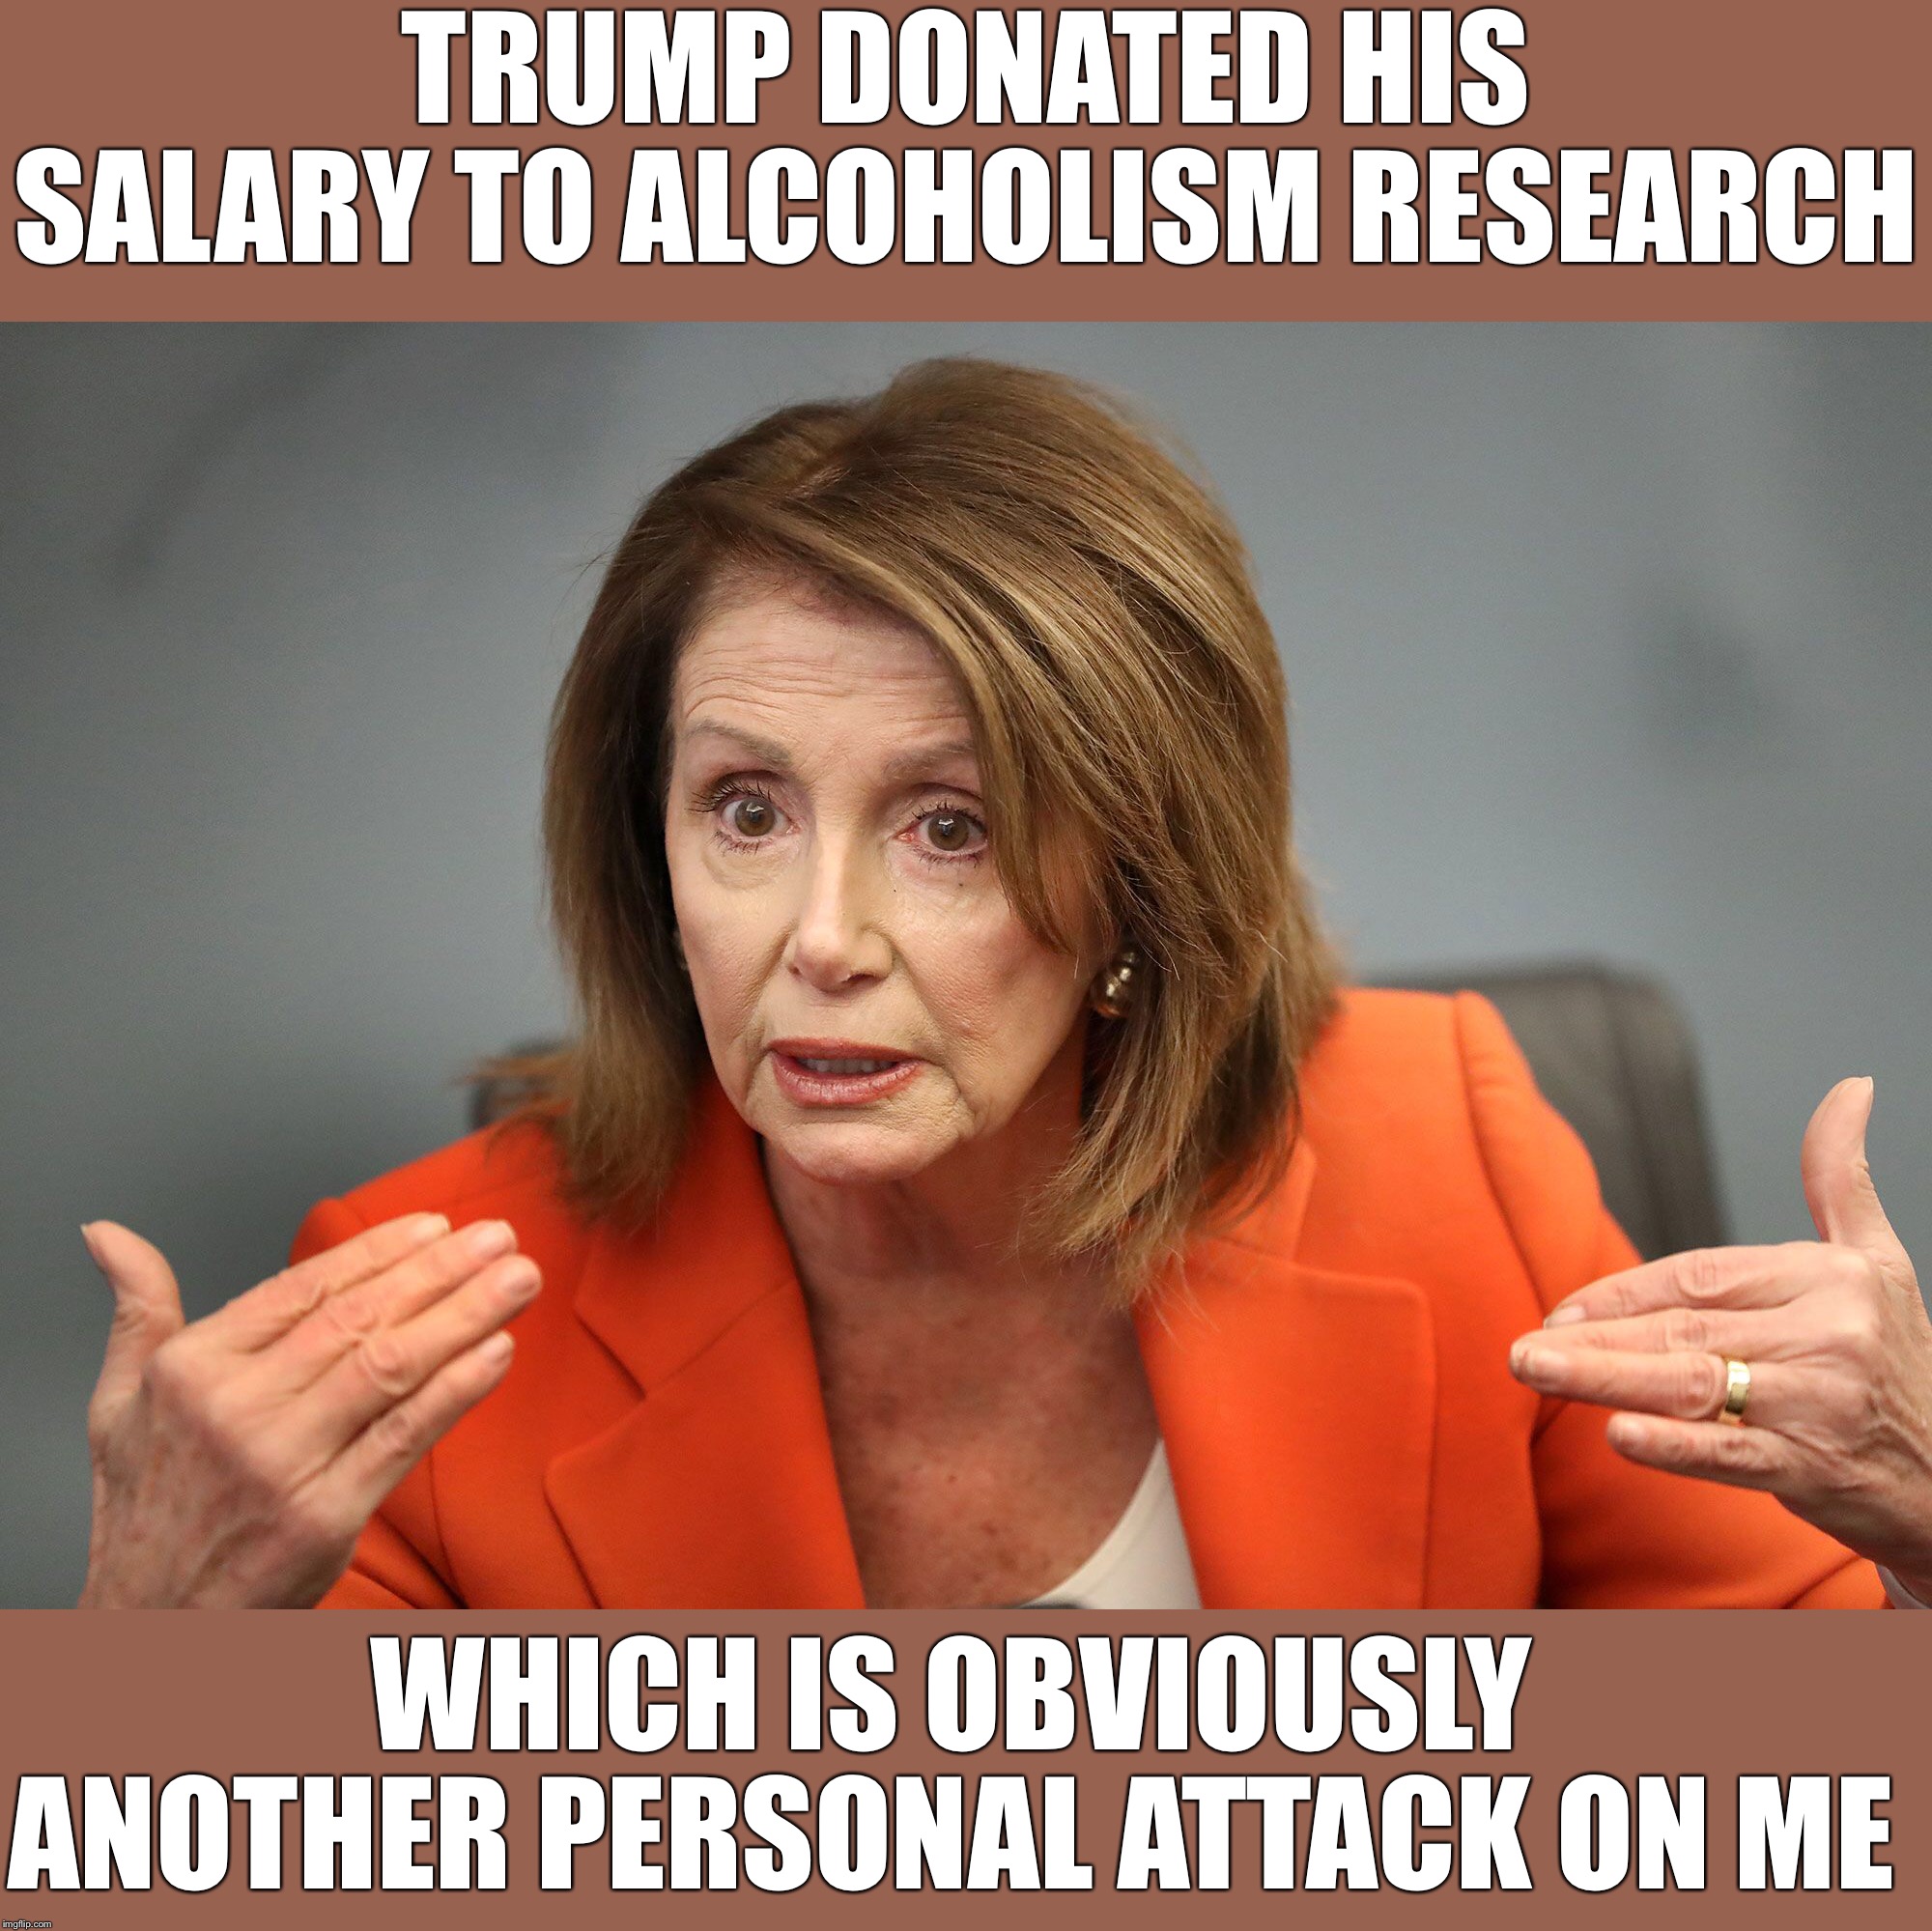 Trump is just trying to help | TRUMP DONATED HIS SALARY TO ALCOHOLISM RESEARCH; WHICH IS OBVIOUSLY ANOTHER PERSONAL ATTACK ON ME | image tagged in maga | made w/ Imgflip meme maker